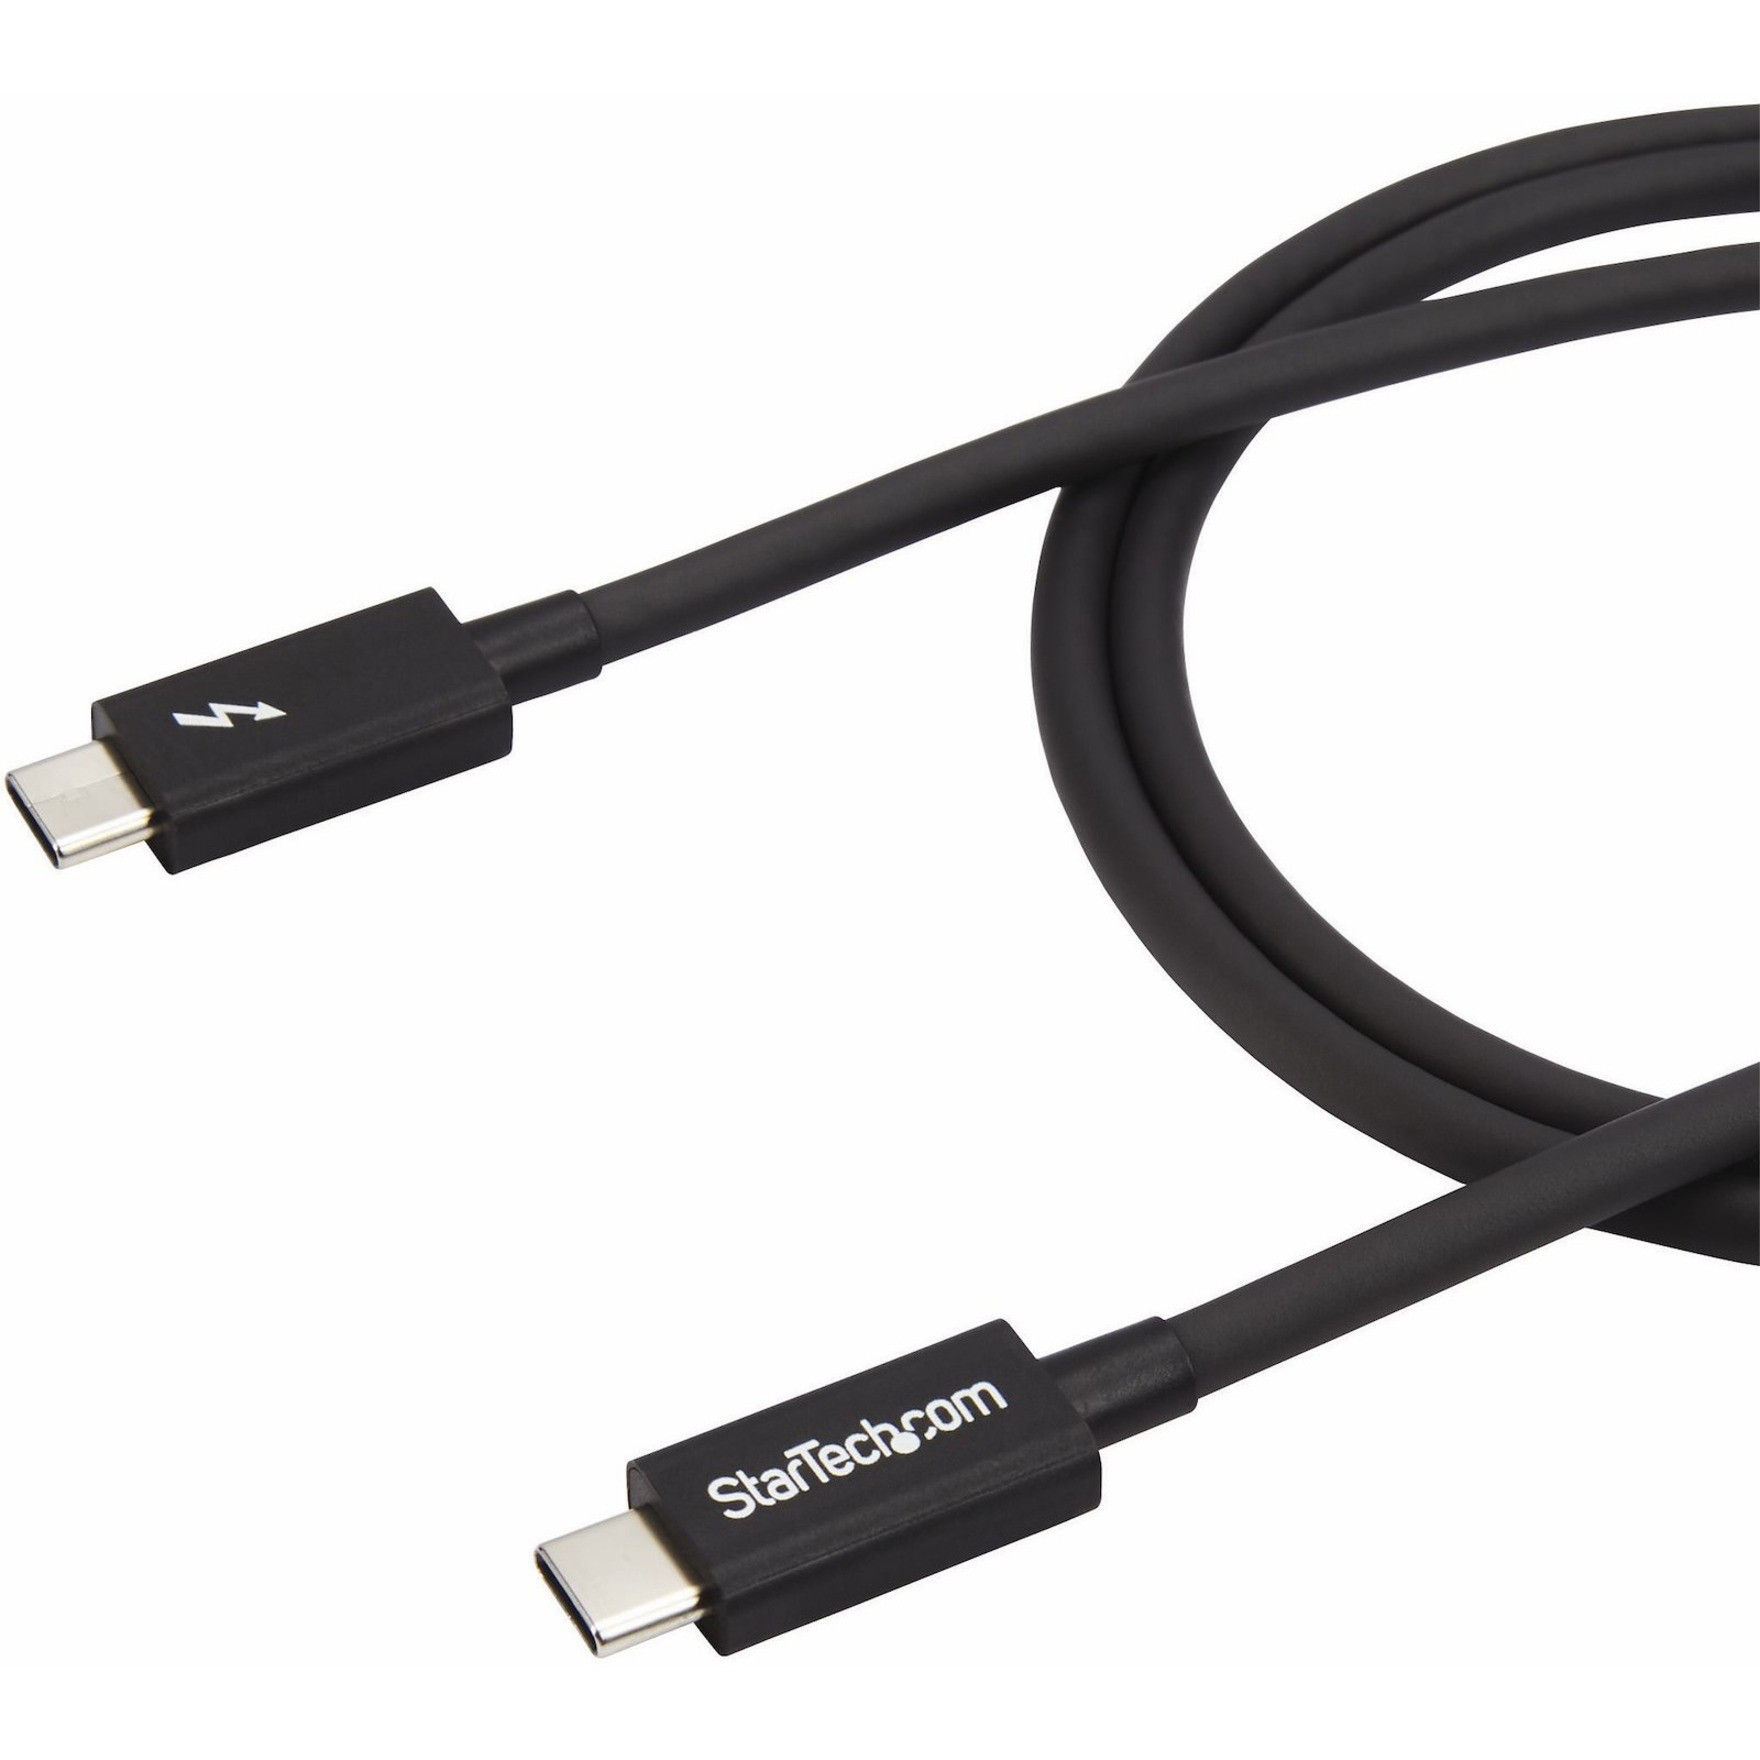 StarTech USB - C Thunderbolt 3 Cable at Rs 3500/number, USB Cable in  Bengaluru